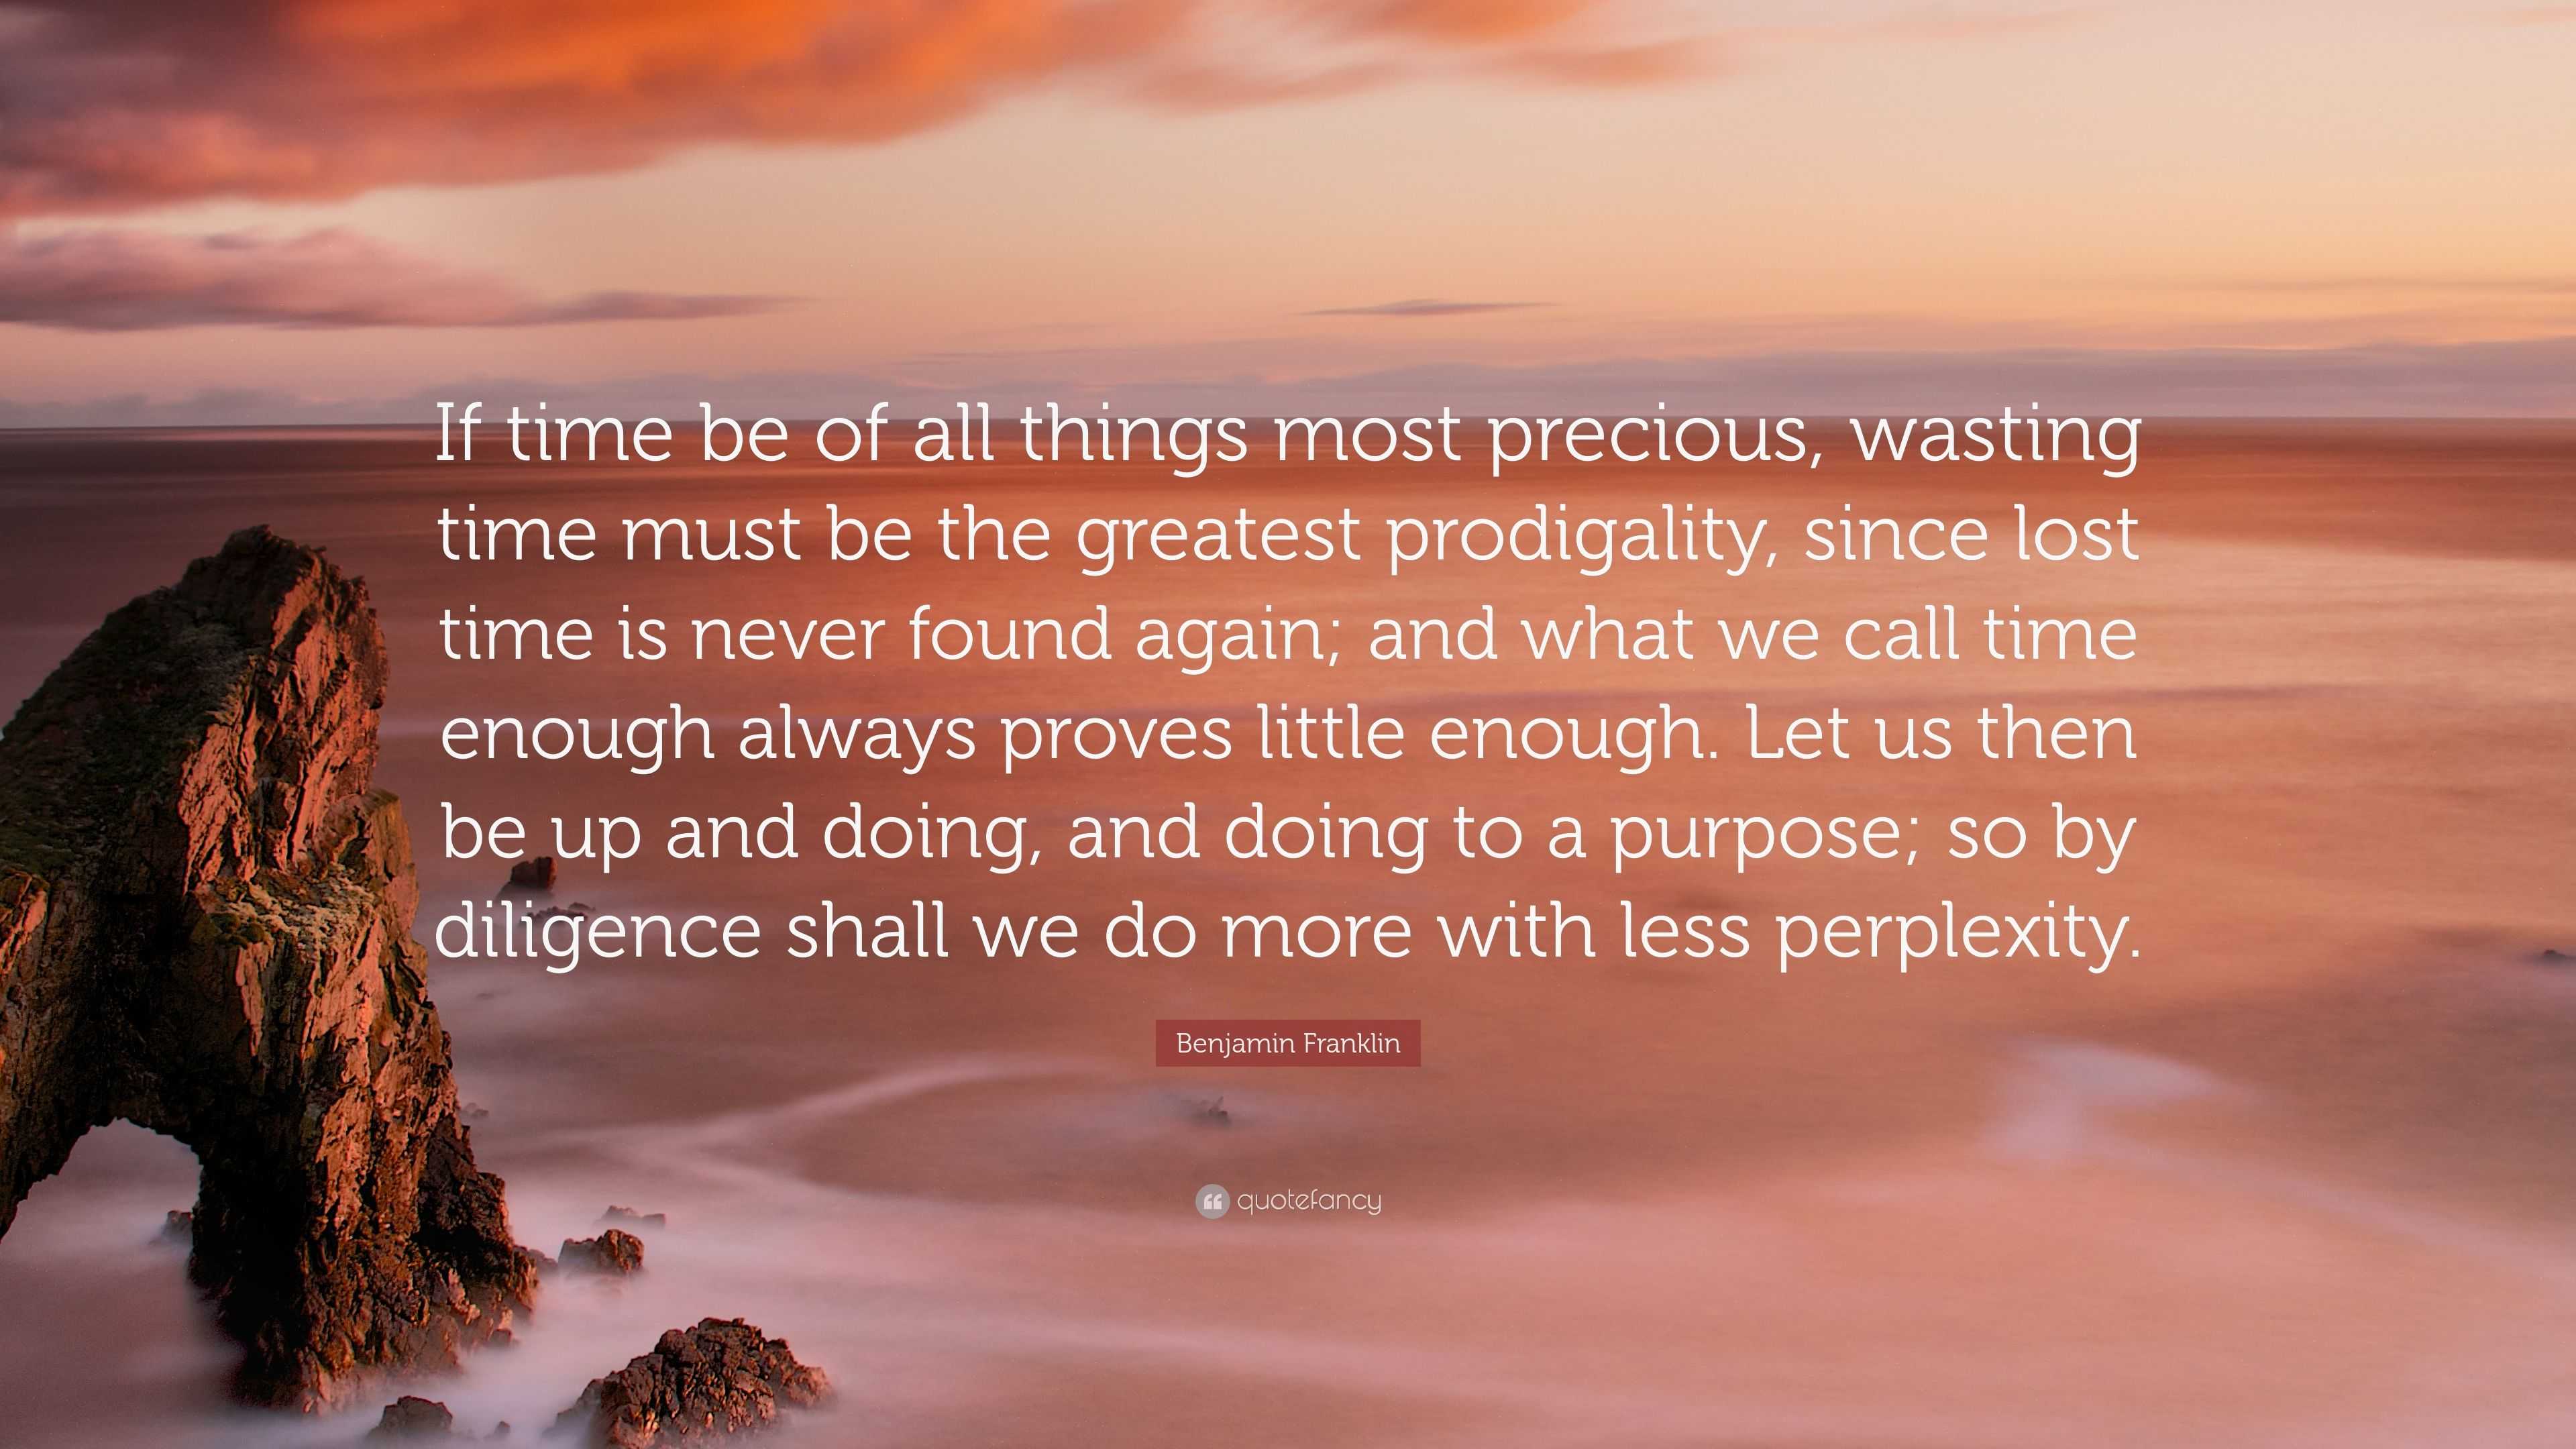 Benjamin Franklin Quote: “If time be of all things most precious, wasting  time must be the greatest prodigality, since lost time is never found ag...”